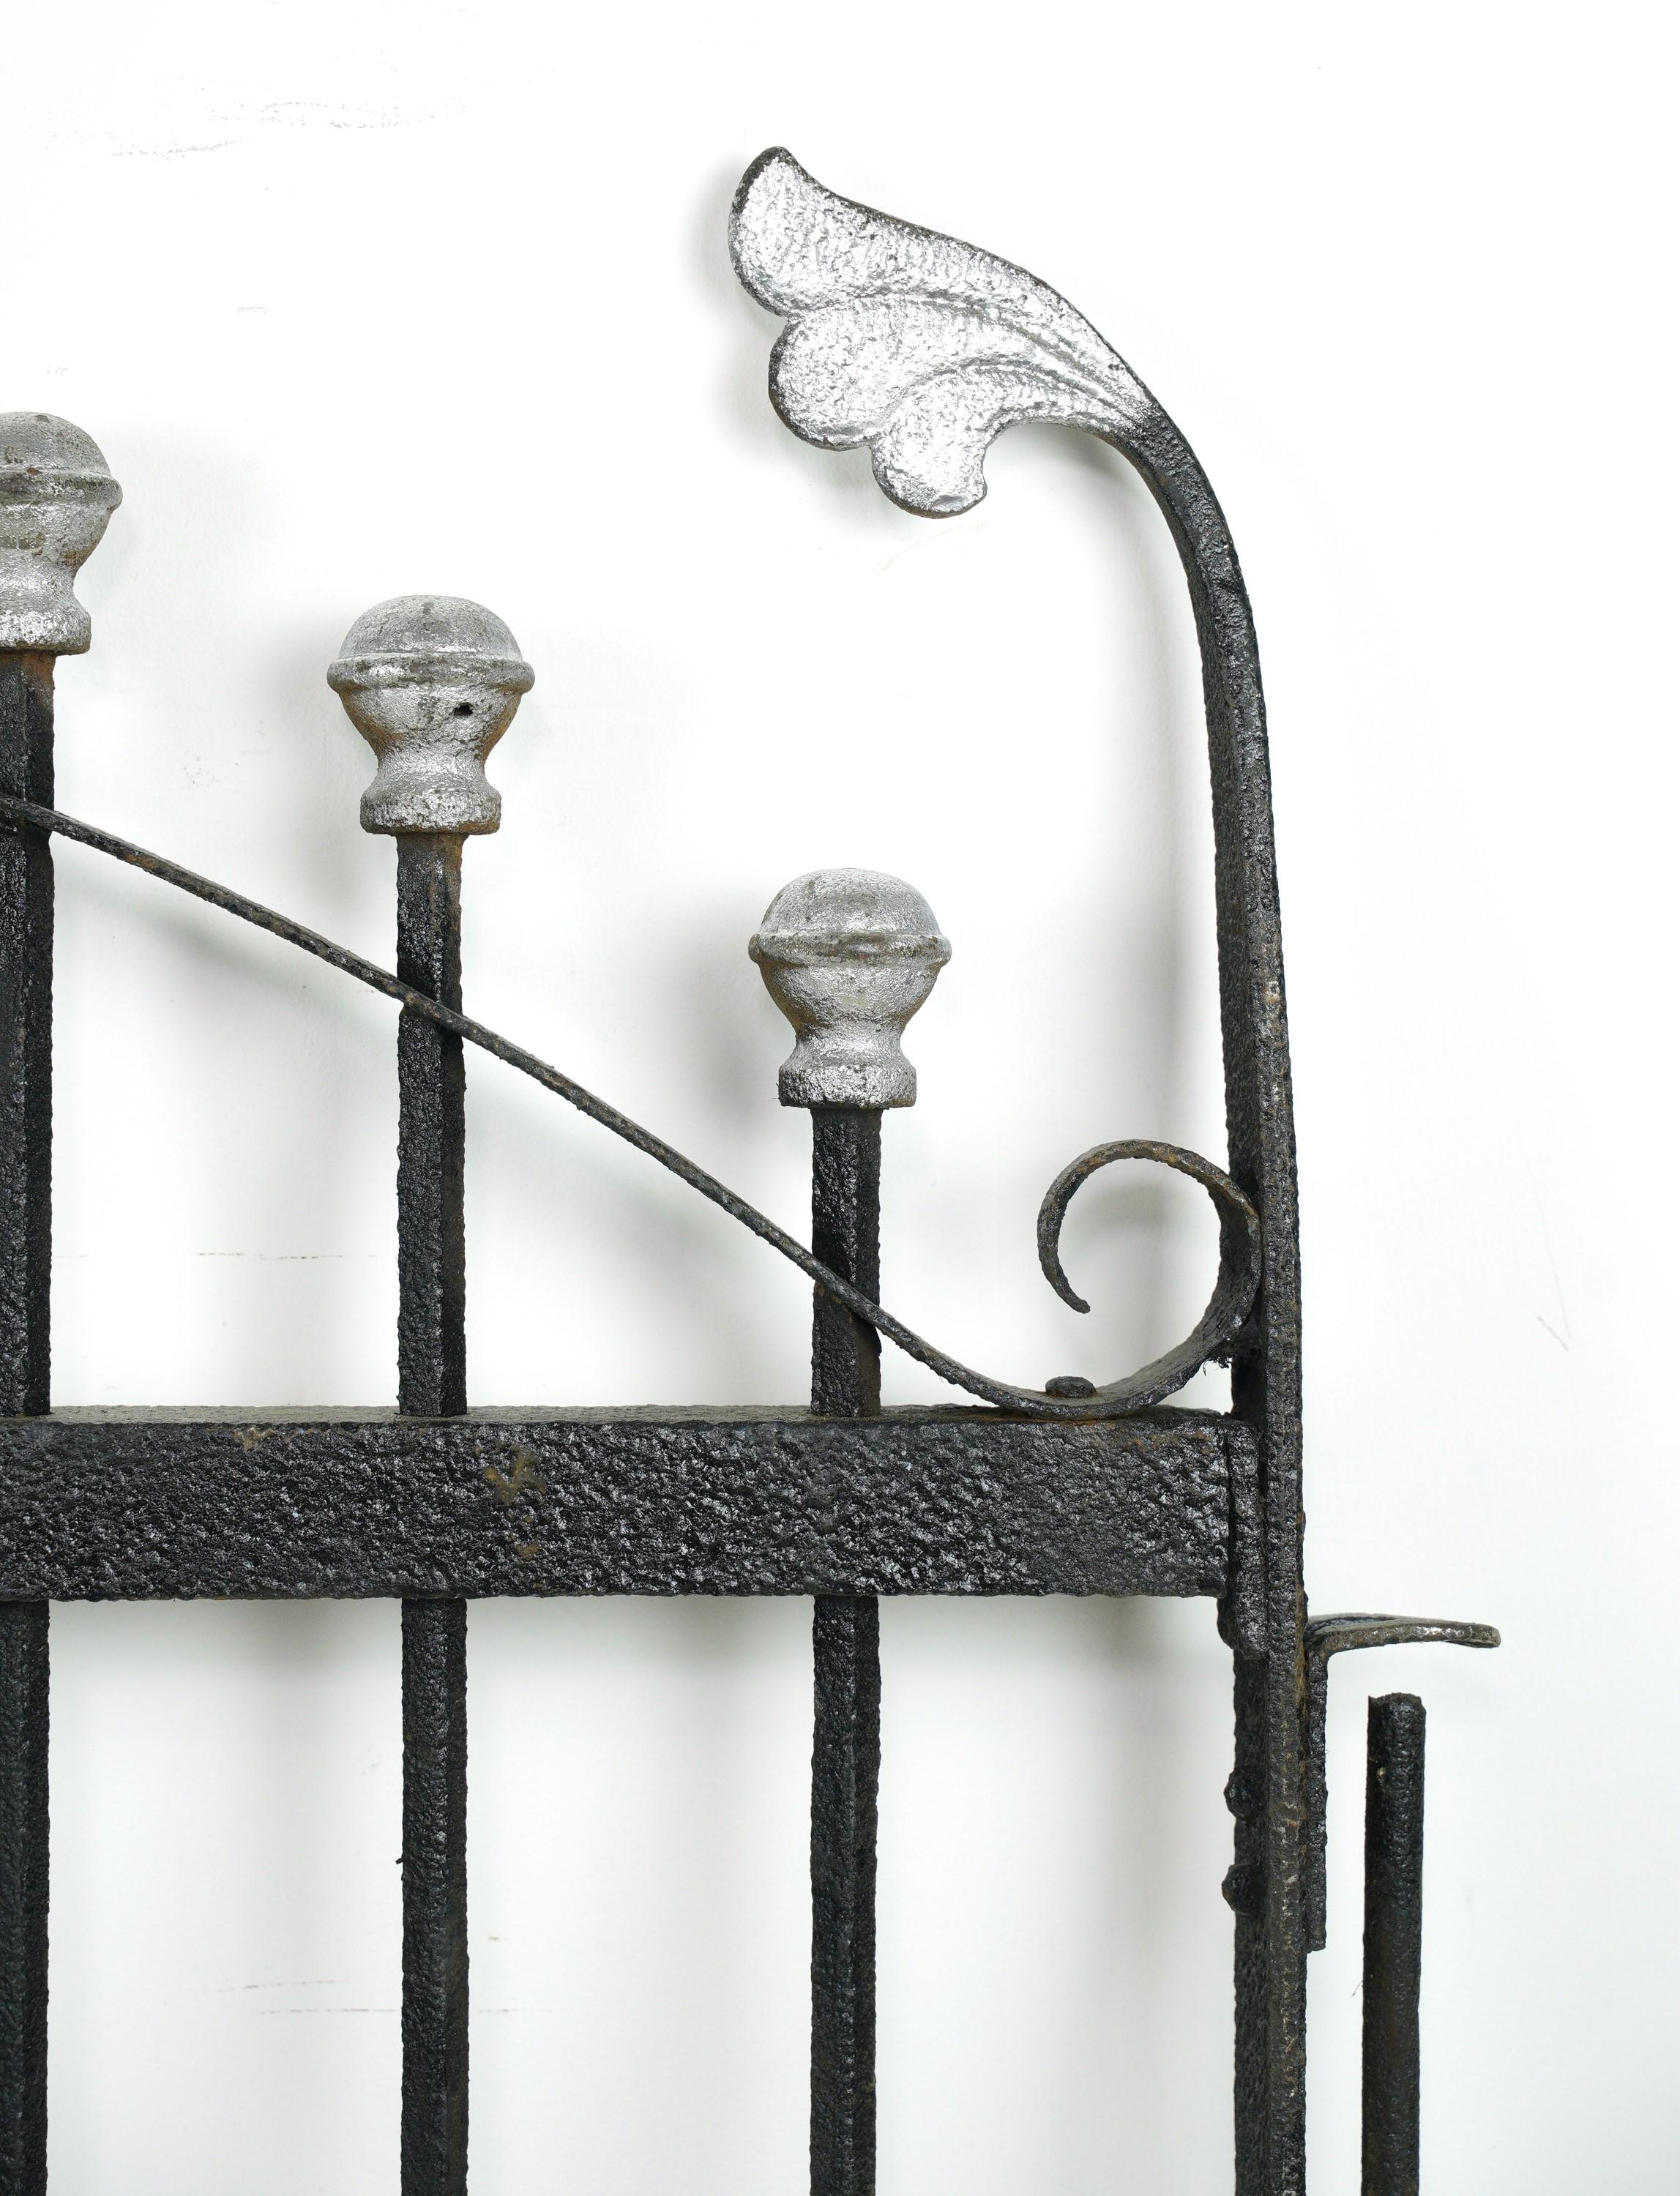 37 in. Wrought Iron Privacy Yard Gate w Ball Finials  In Good Condition For Sale In New York, NY